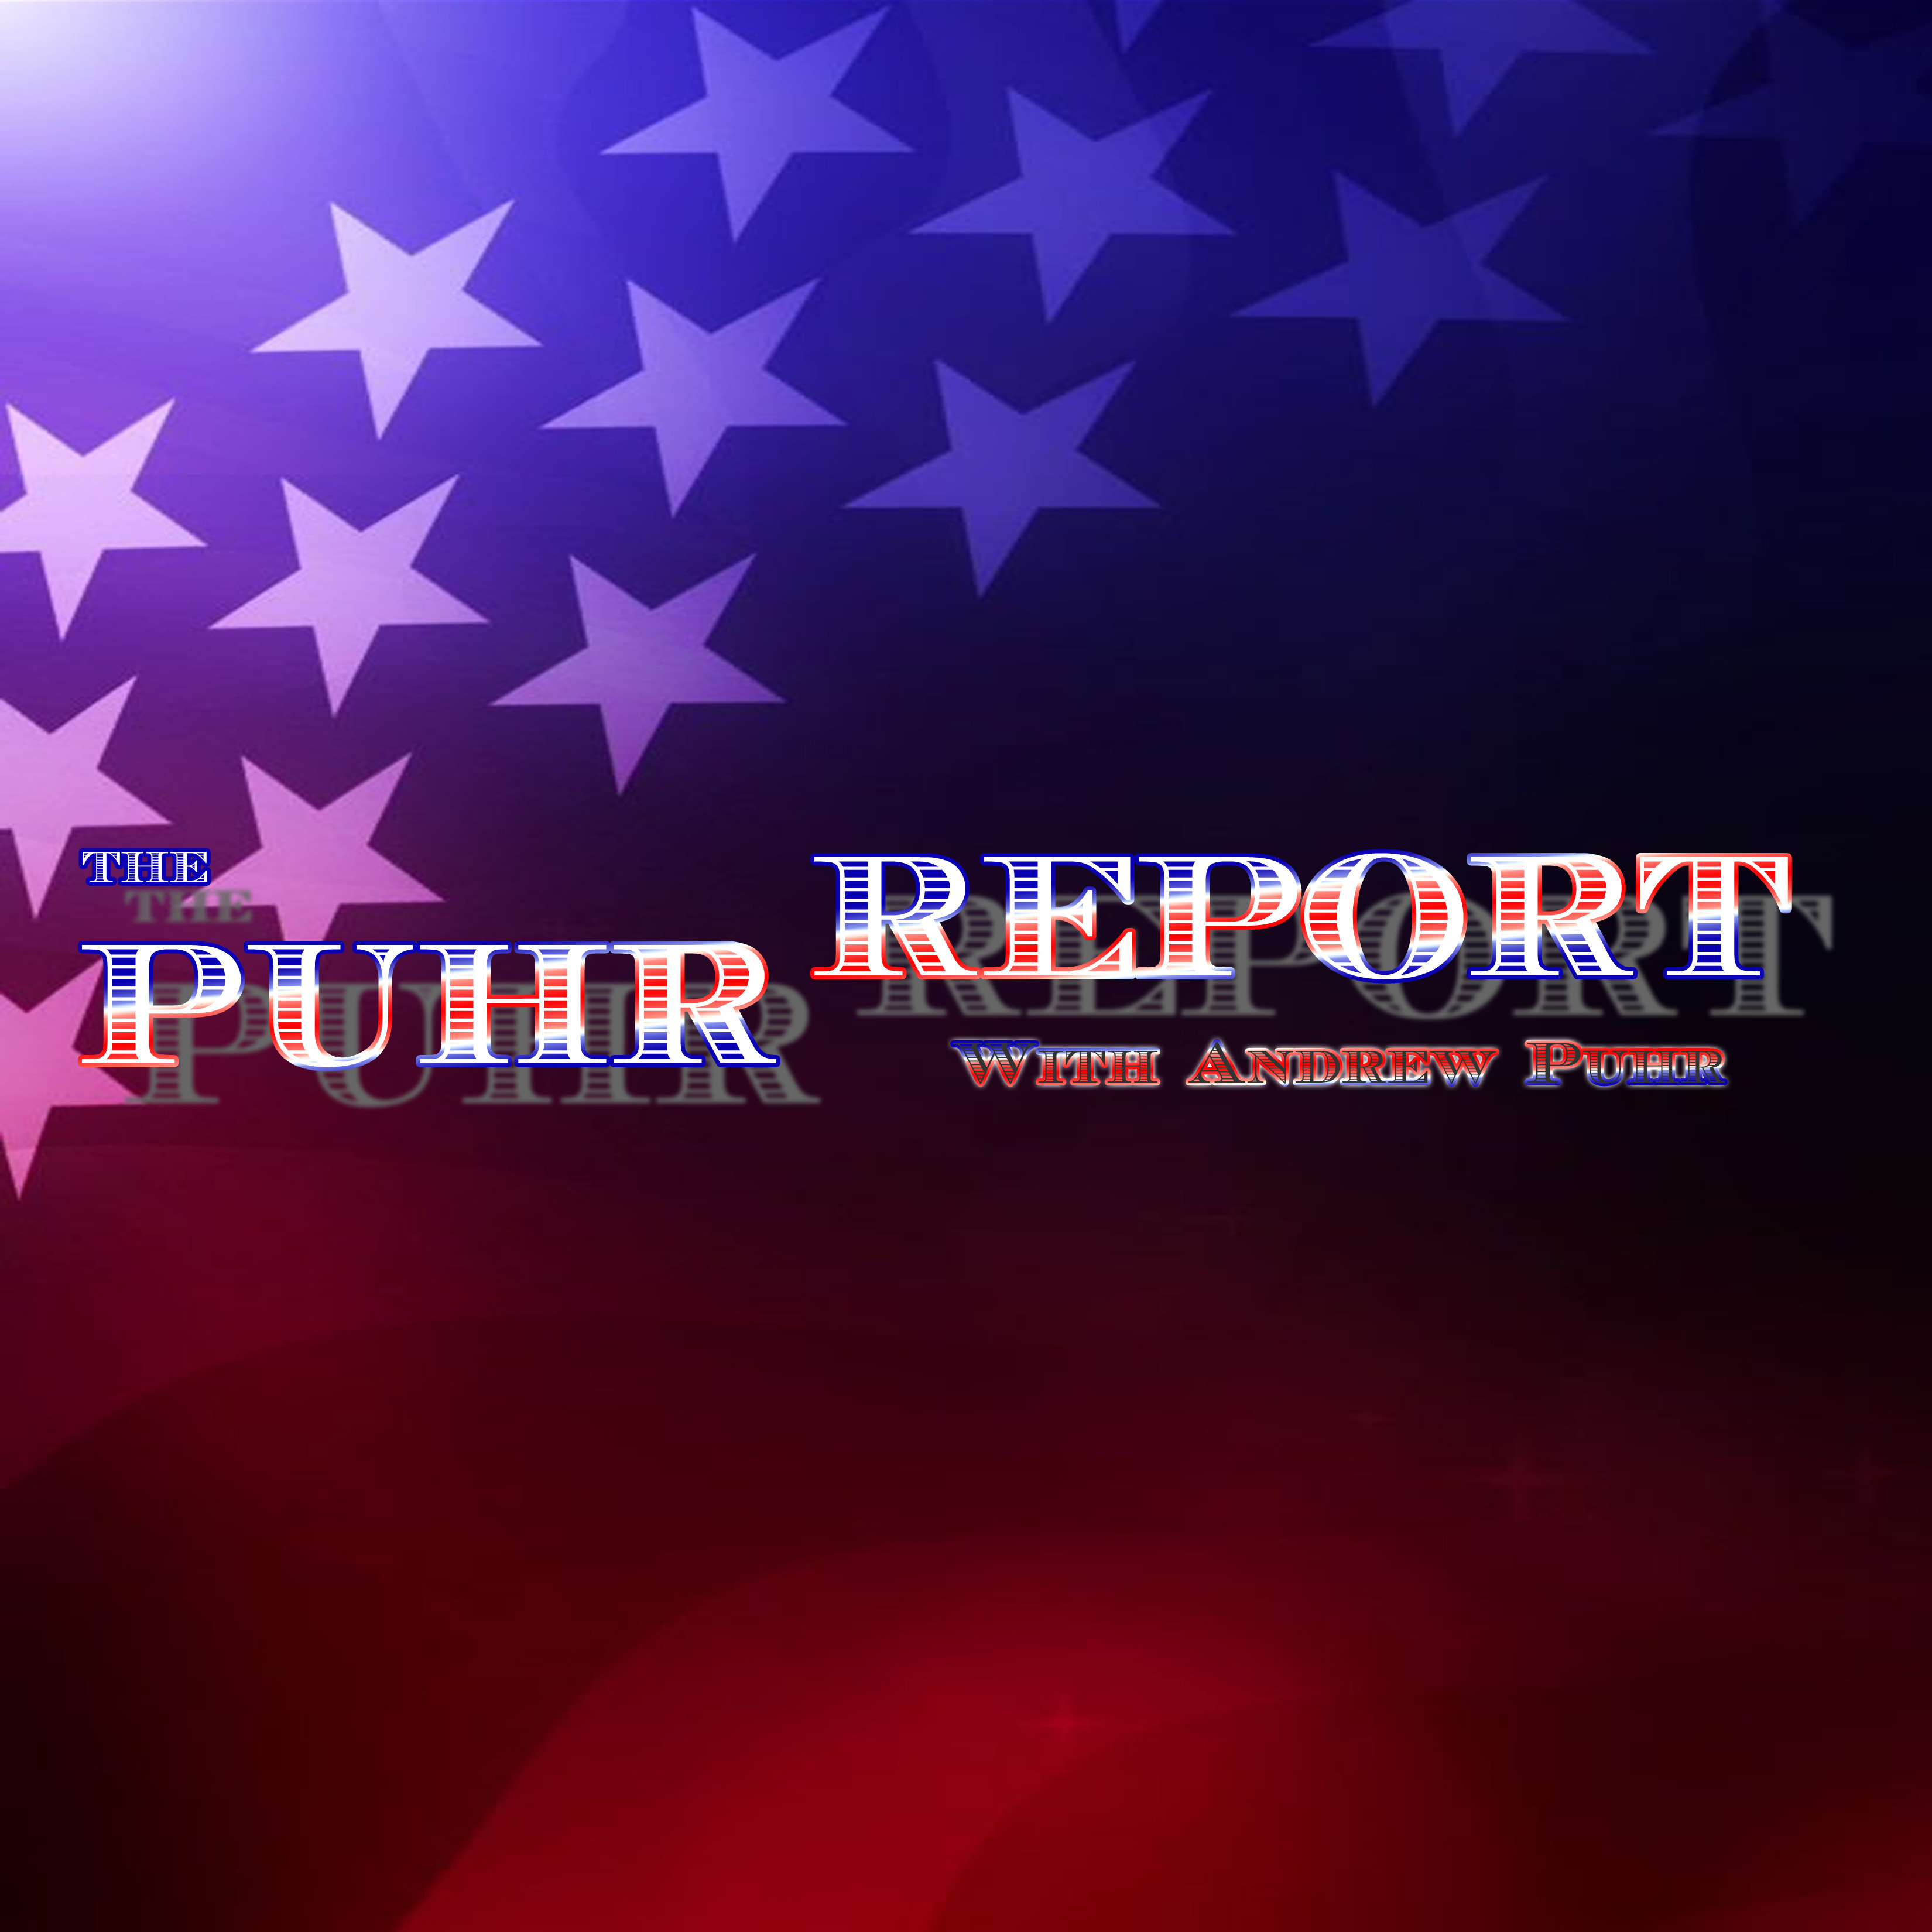 The Puhr Report 018 - Trump, Great President or Greatest President?